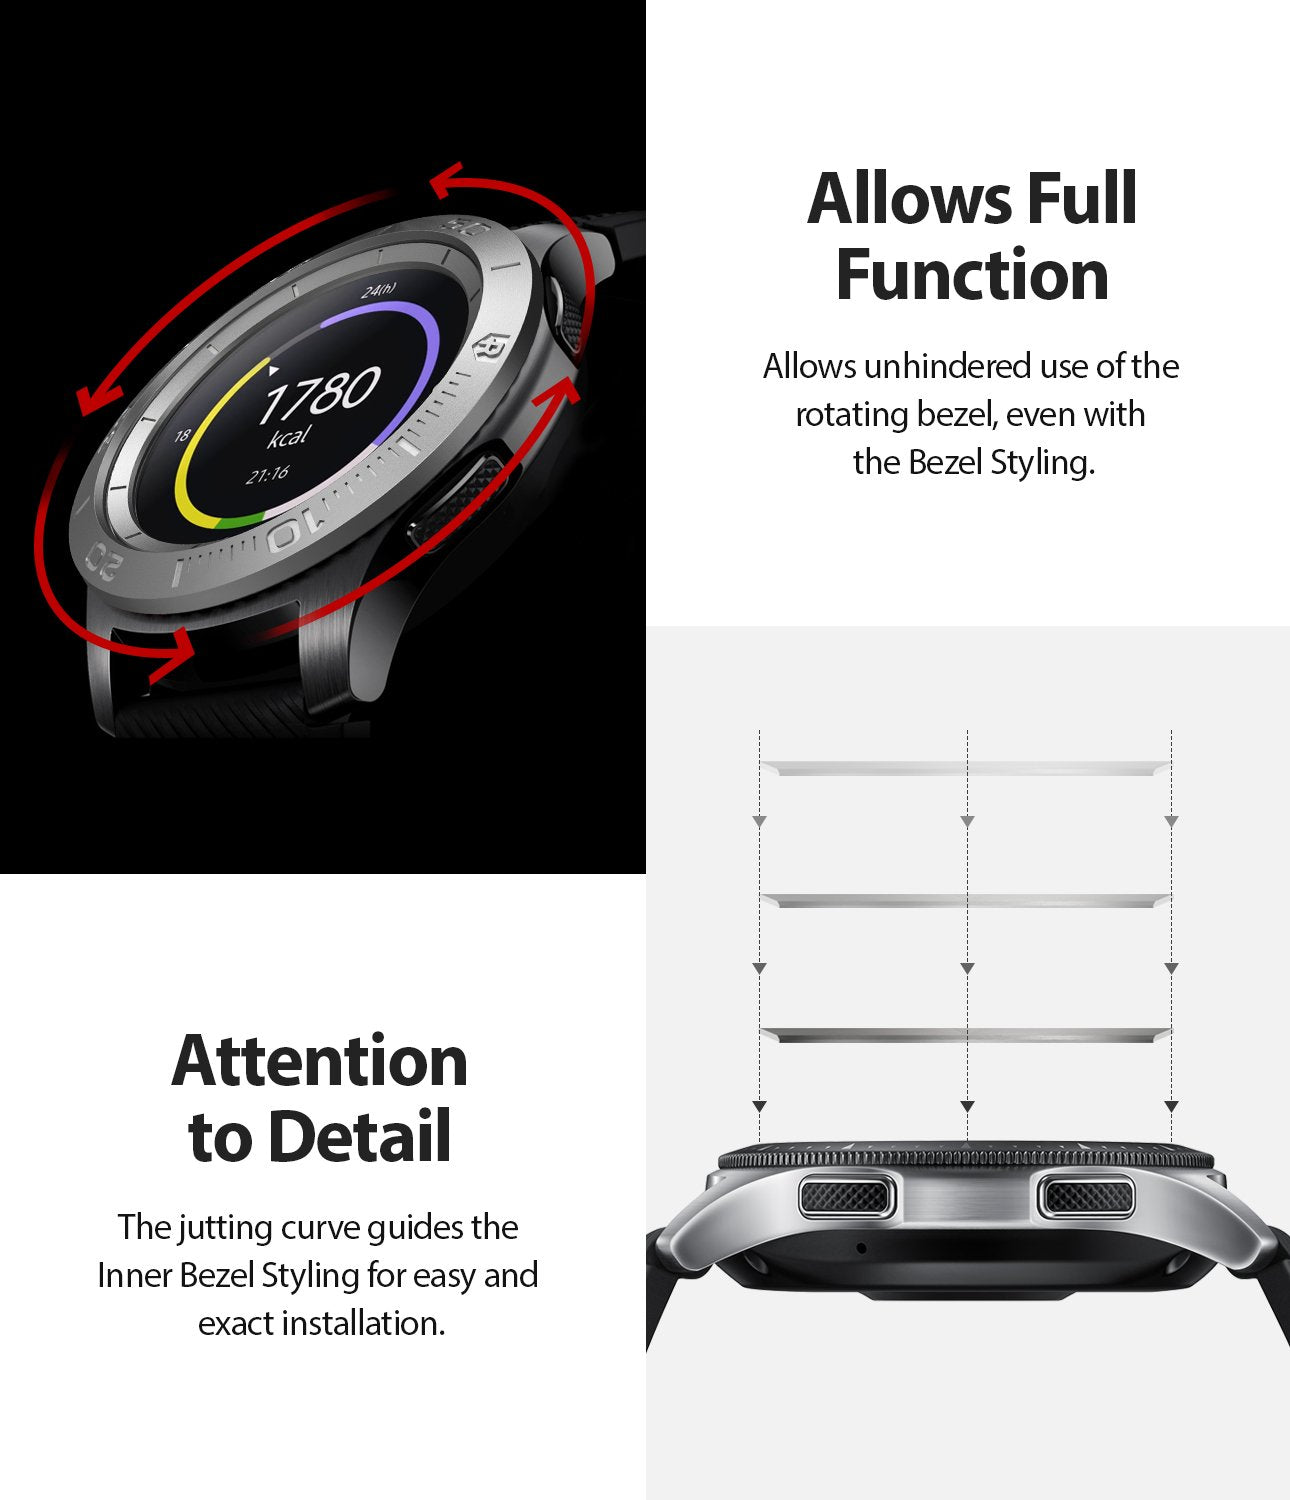 Ringke Inner Bezel Styling for Galaxy Watch 46mm, Gear S3 Frontier, and Gear S3 Classic, GW-46-IN-03, STAINLESS STEEL, attention to detail